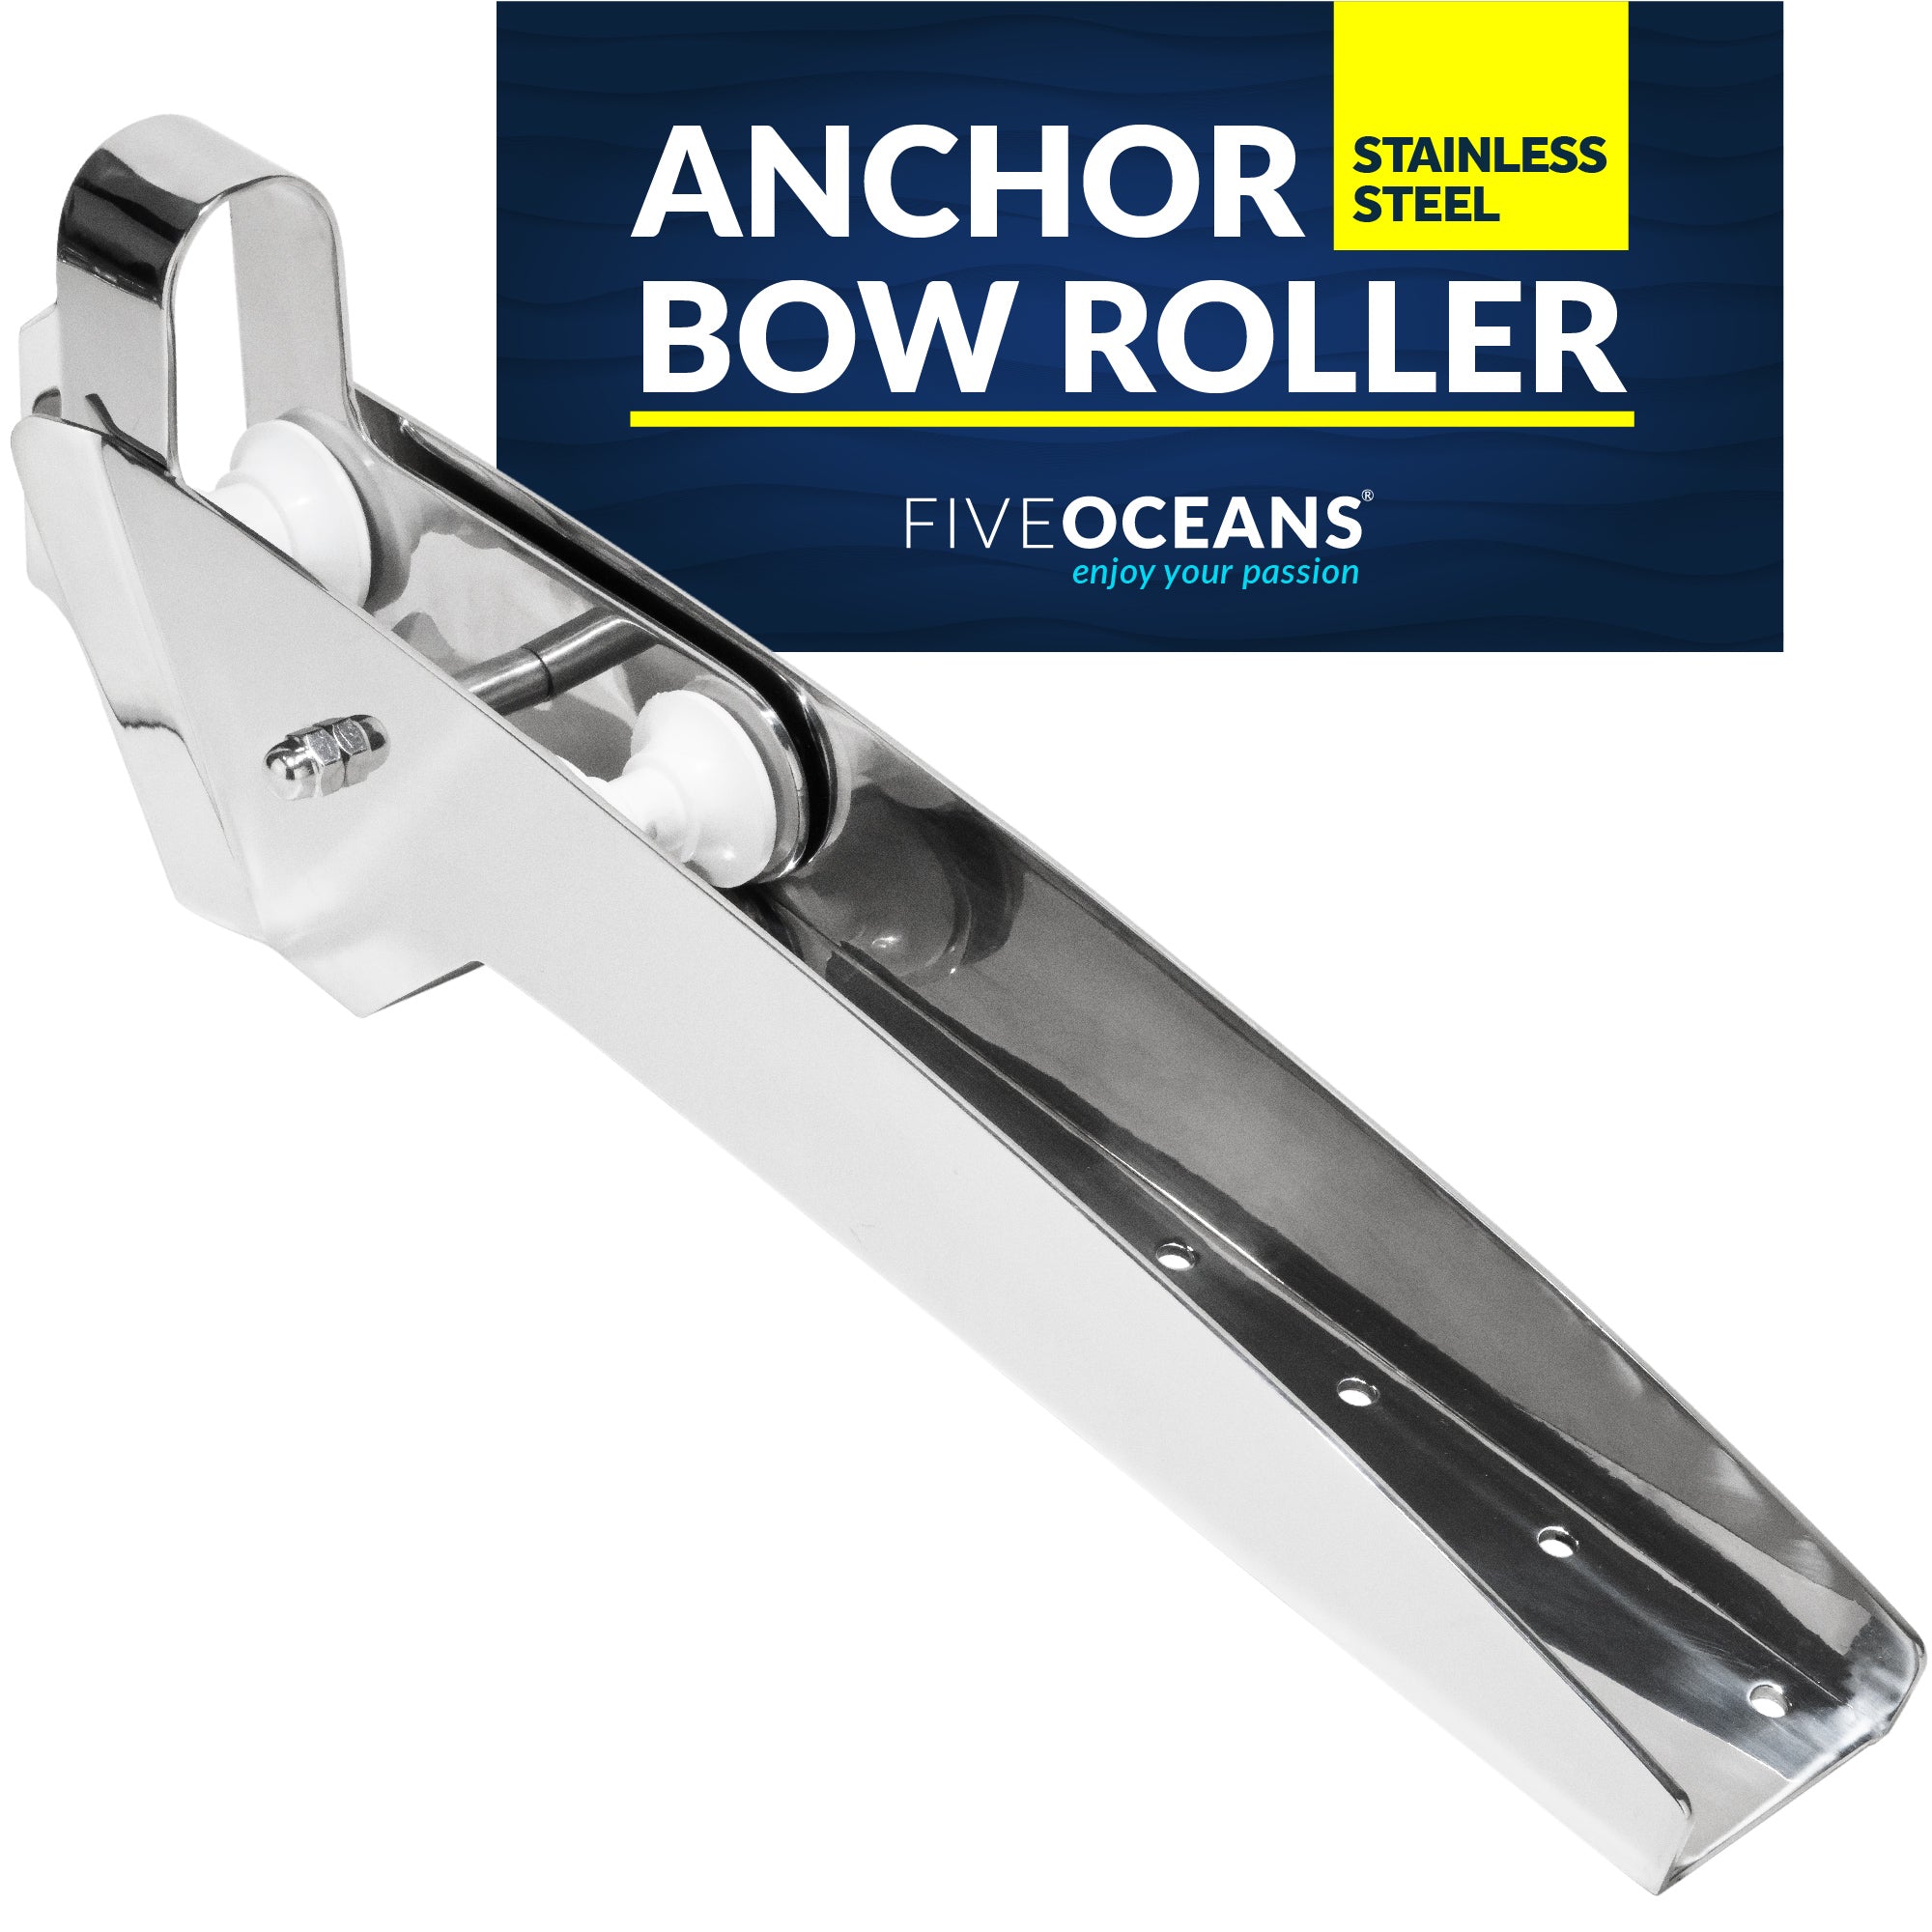 Pivoting Self-launching Anchor Bow Roller, Length 23", Stainless Steel - FO4185